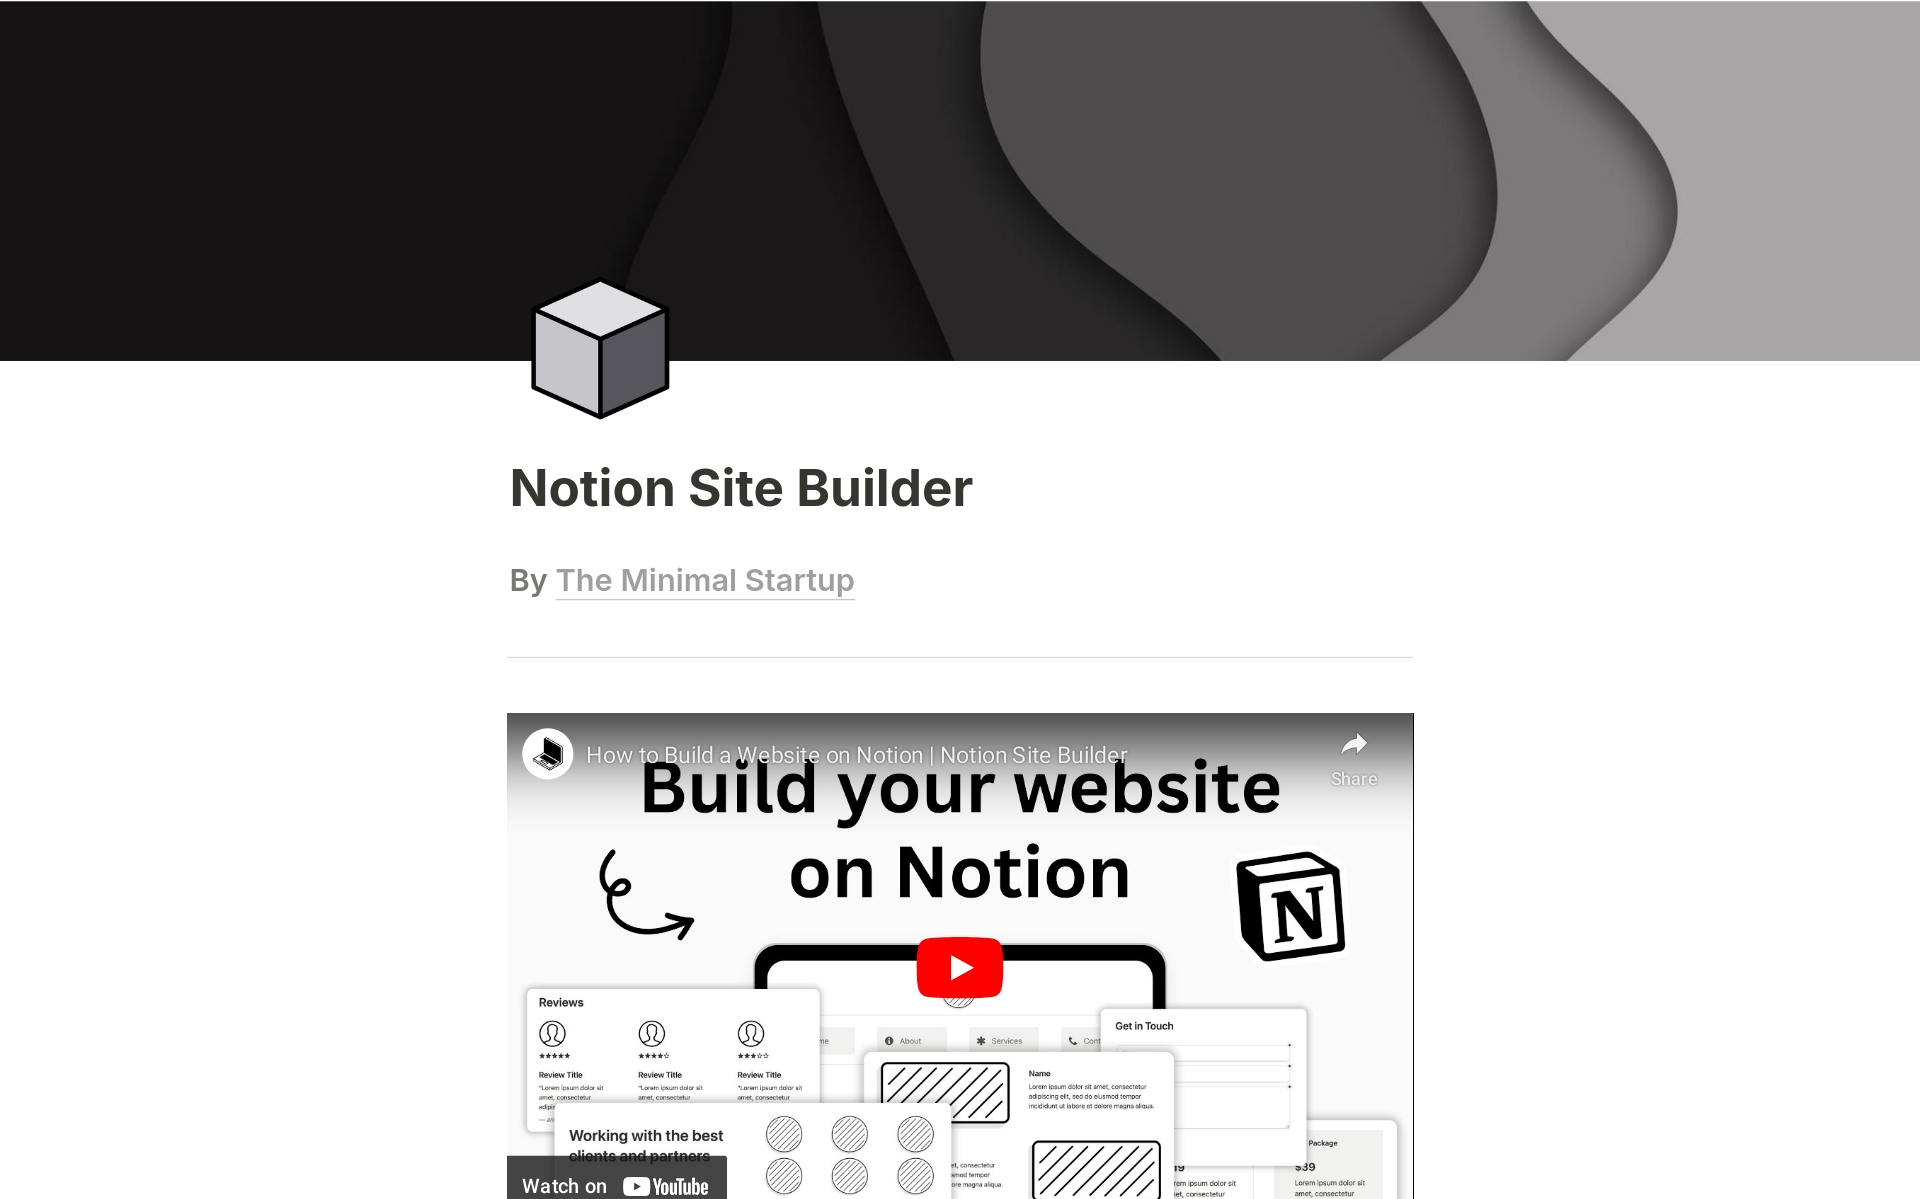 Are you a business, creator, freelancer or student trying to build your website? With Notion Site Builder you get access to 70+ copy-paste components & 10+ premium templates to take your site live within minutes.